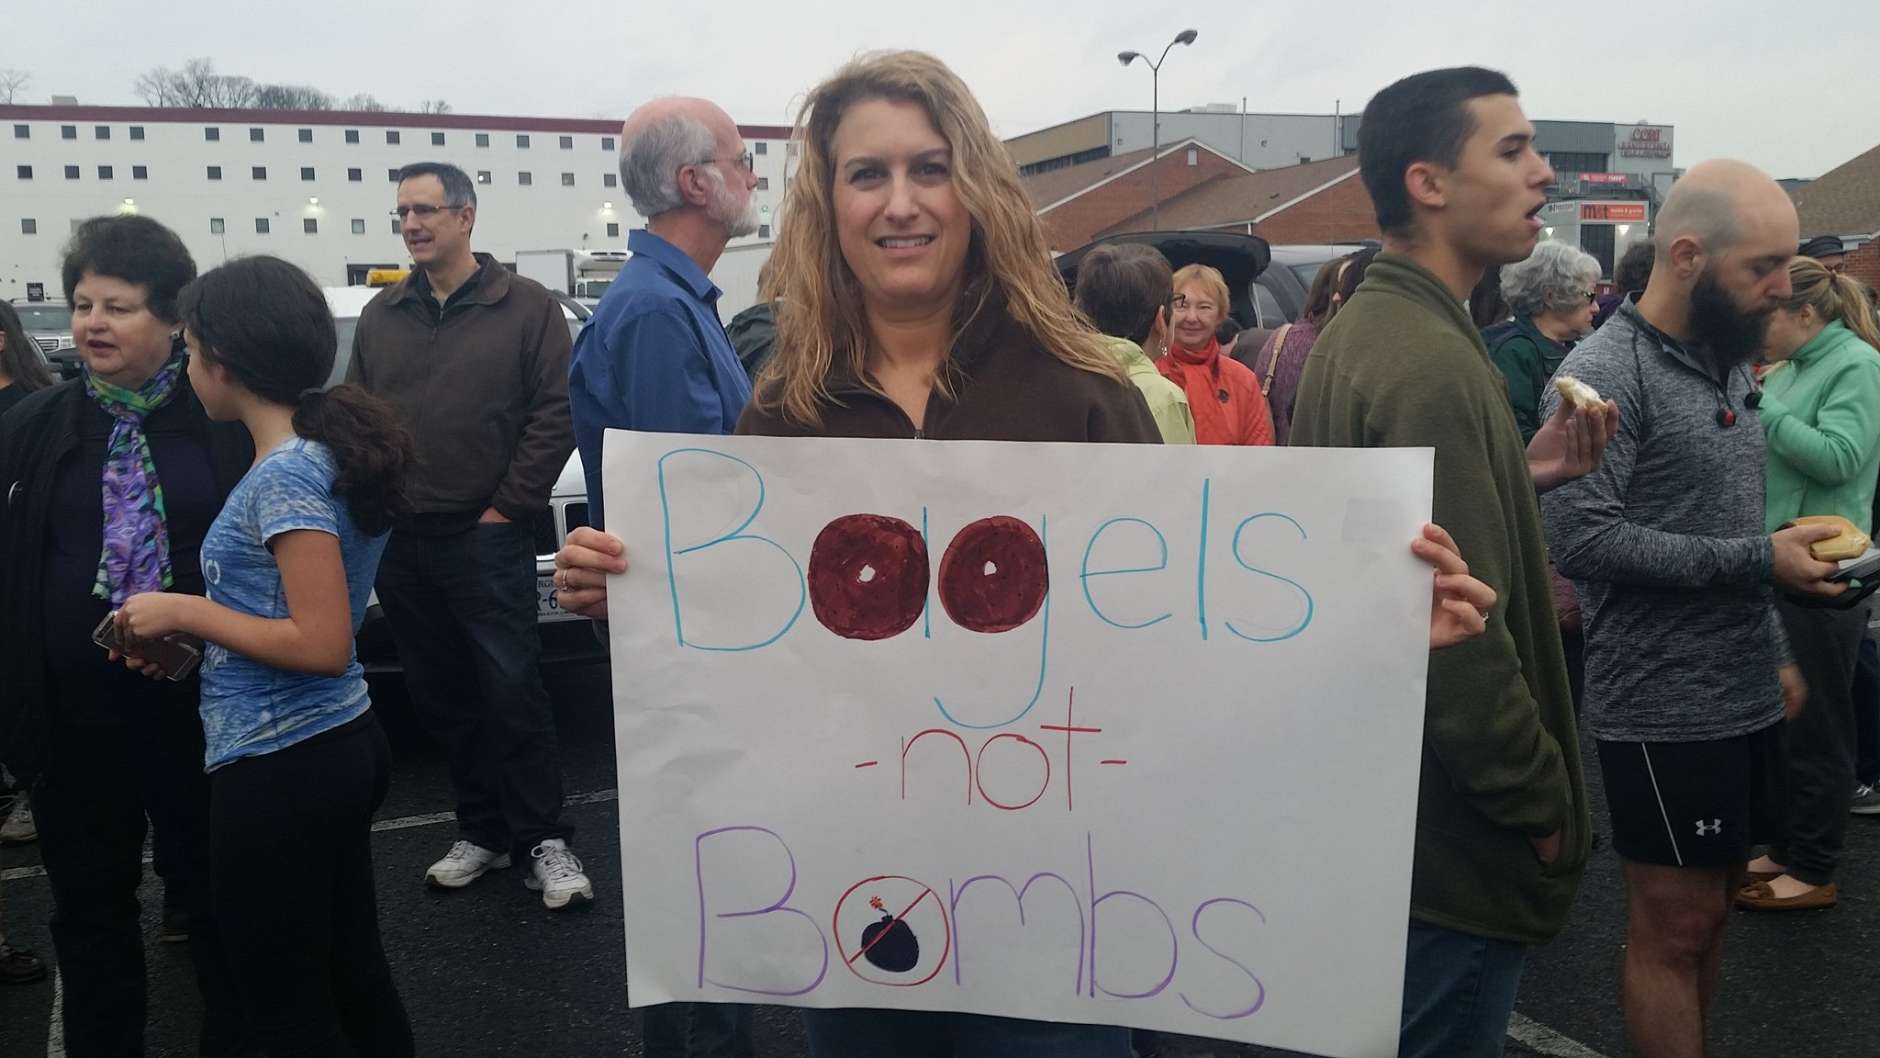 Co-organizer Aviva Goldfarb at Wednesday's Bagels Not Bombs event. (WTOP/Kathy Stewart)